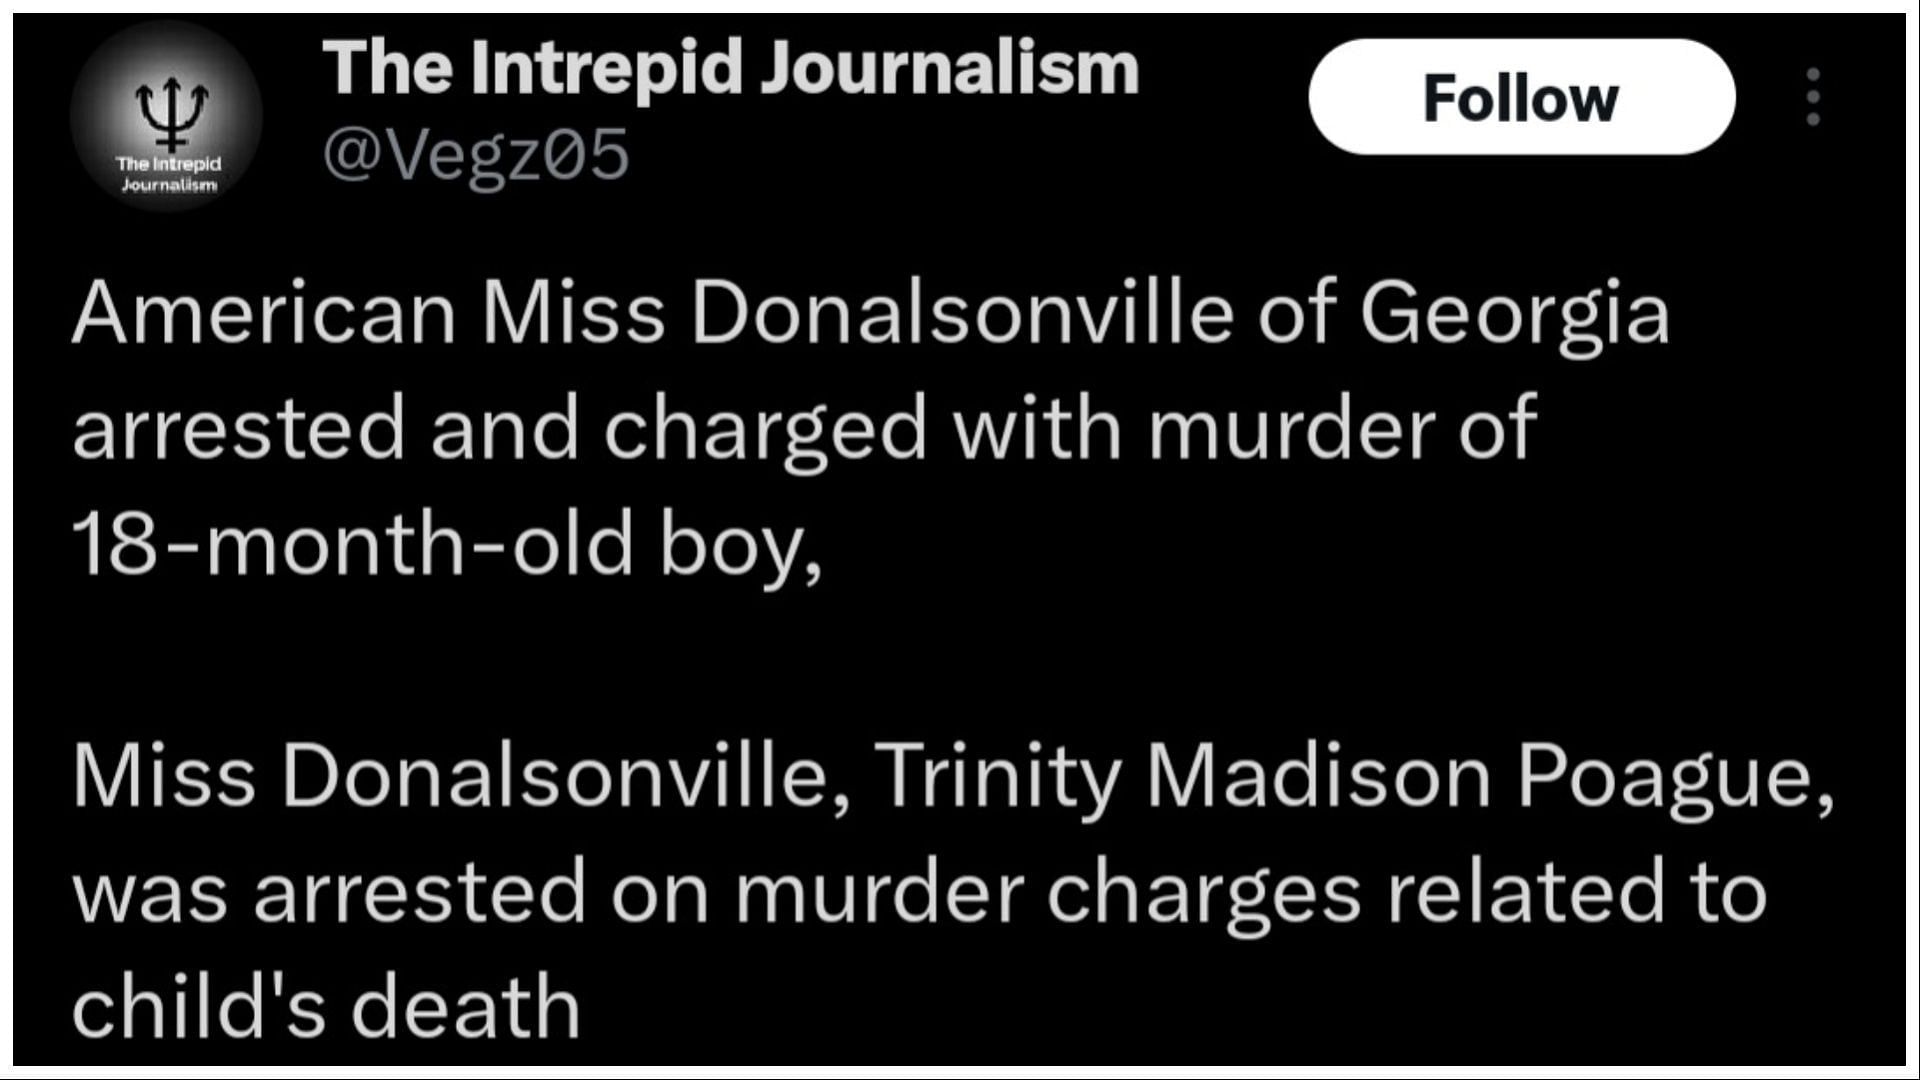 Authorities filed murder charges against Poague, (Image via The Intrepid Journalism/X)